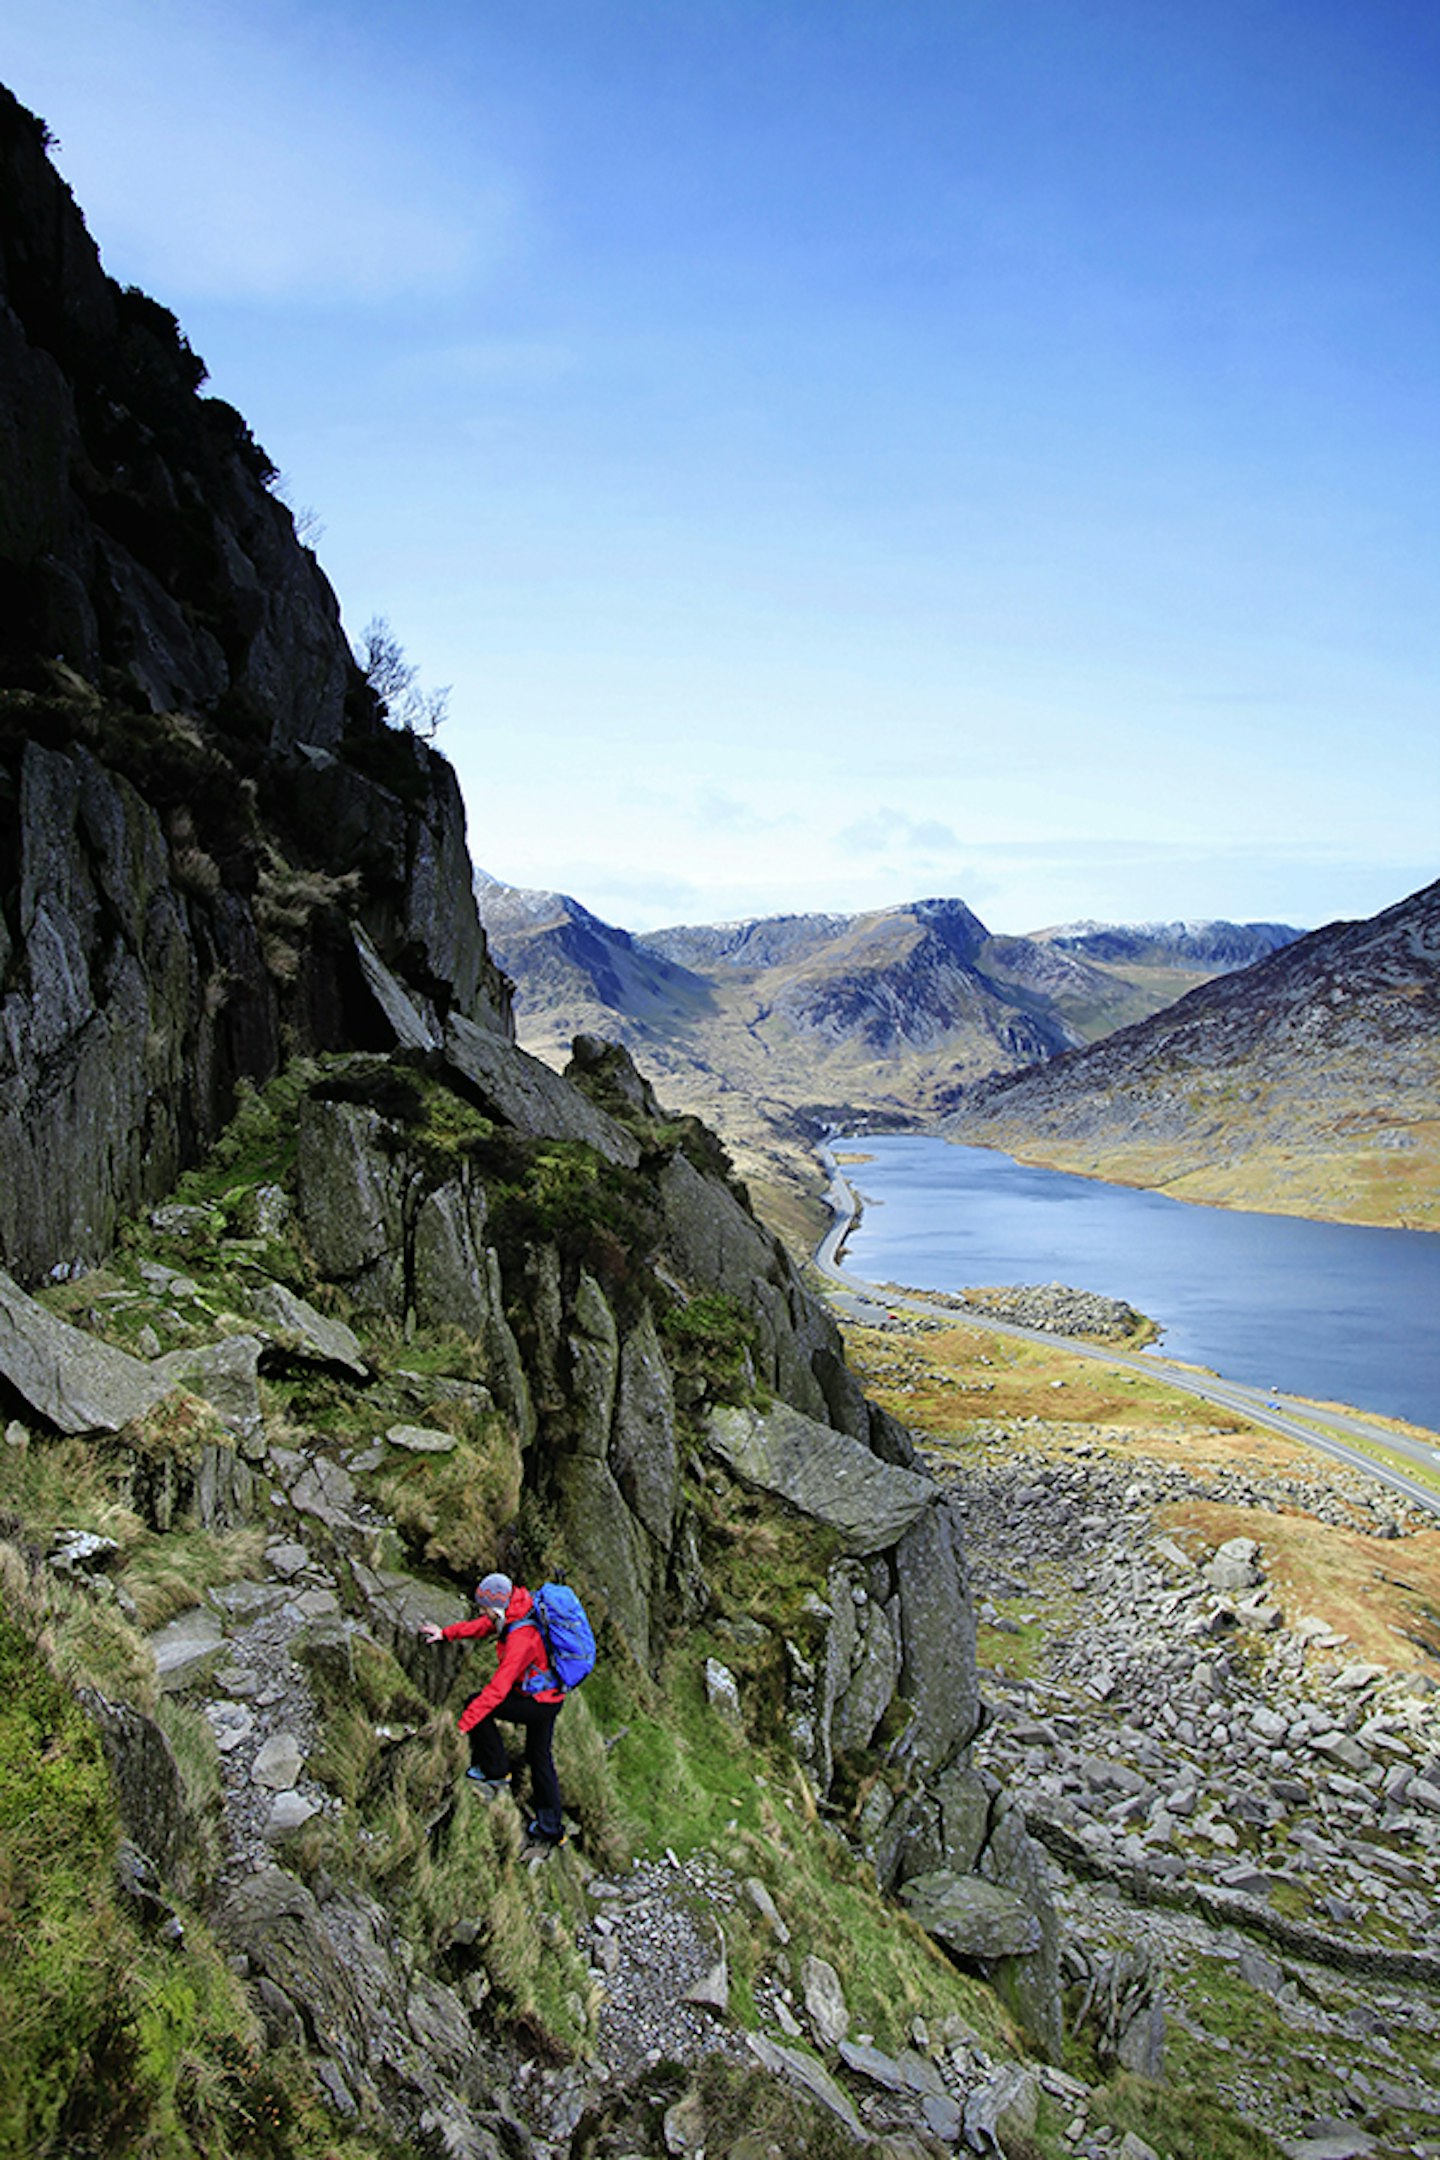 Heading up to the start of the proper scrambling on Tryfan’s north ridge – this is just the warm-up!